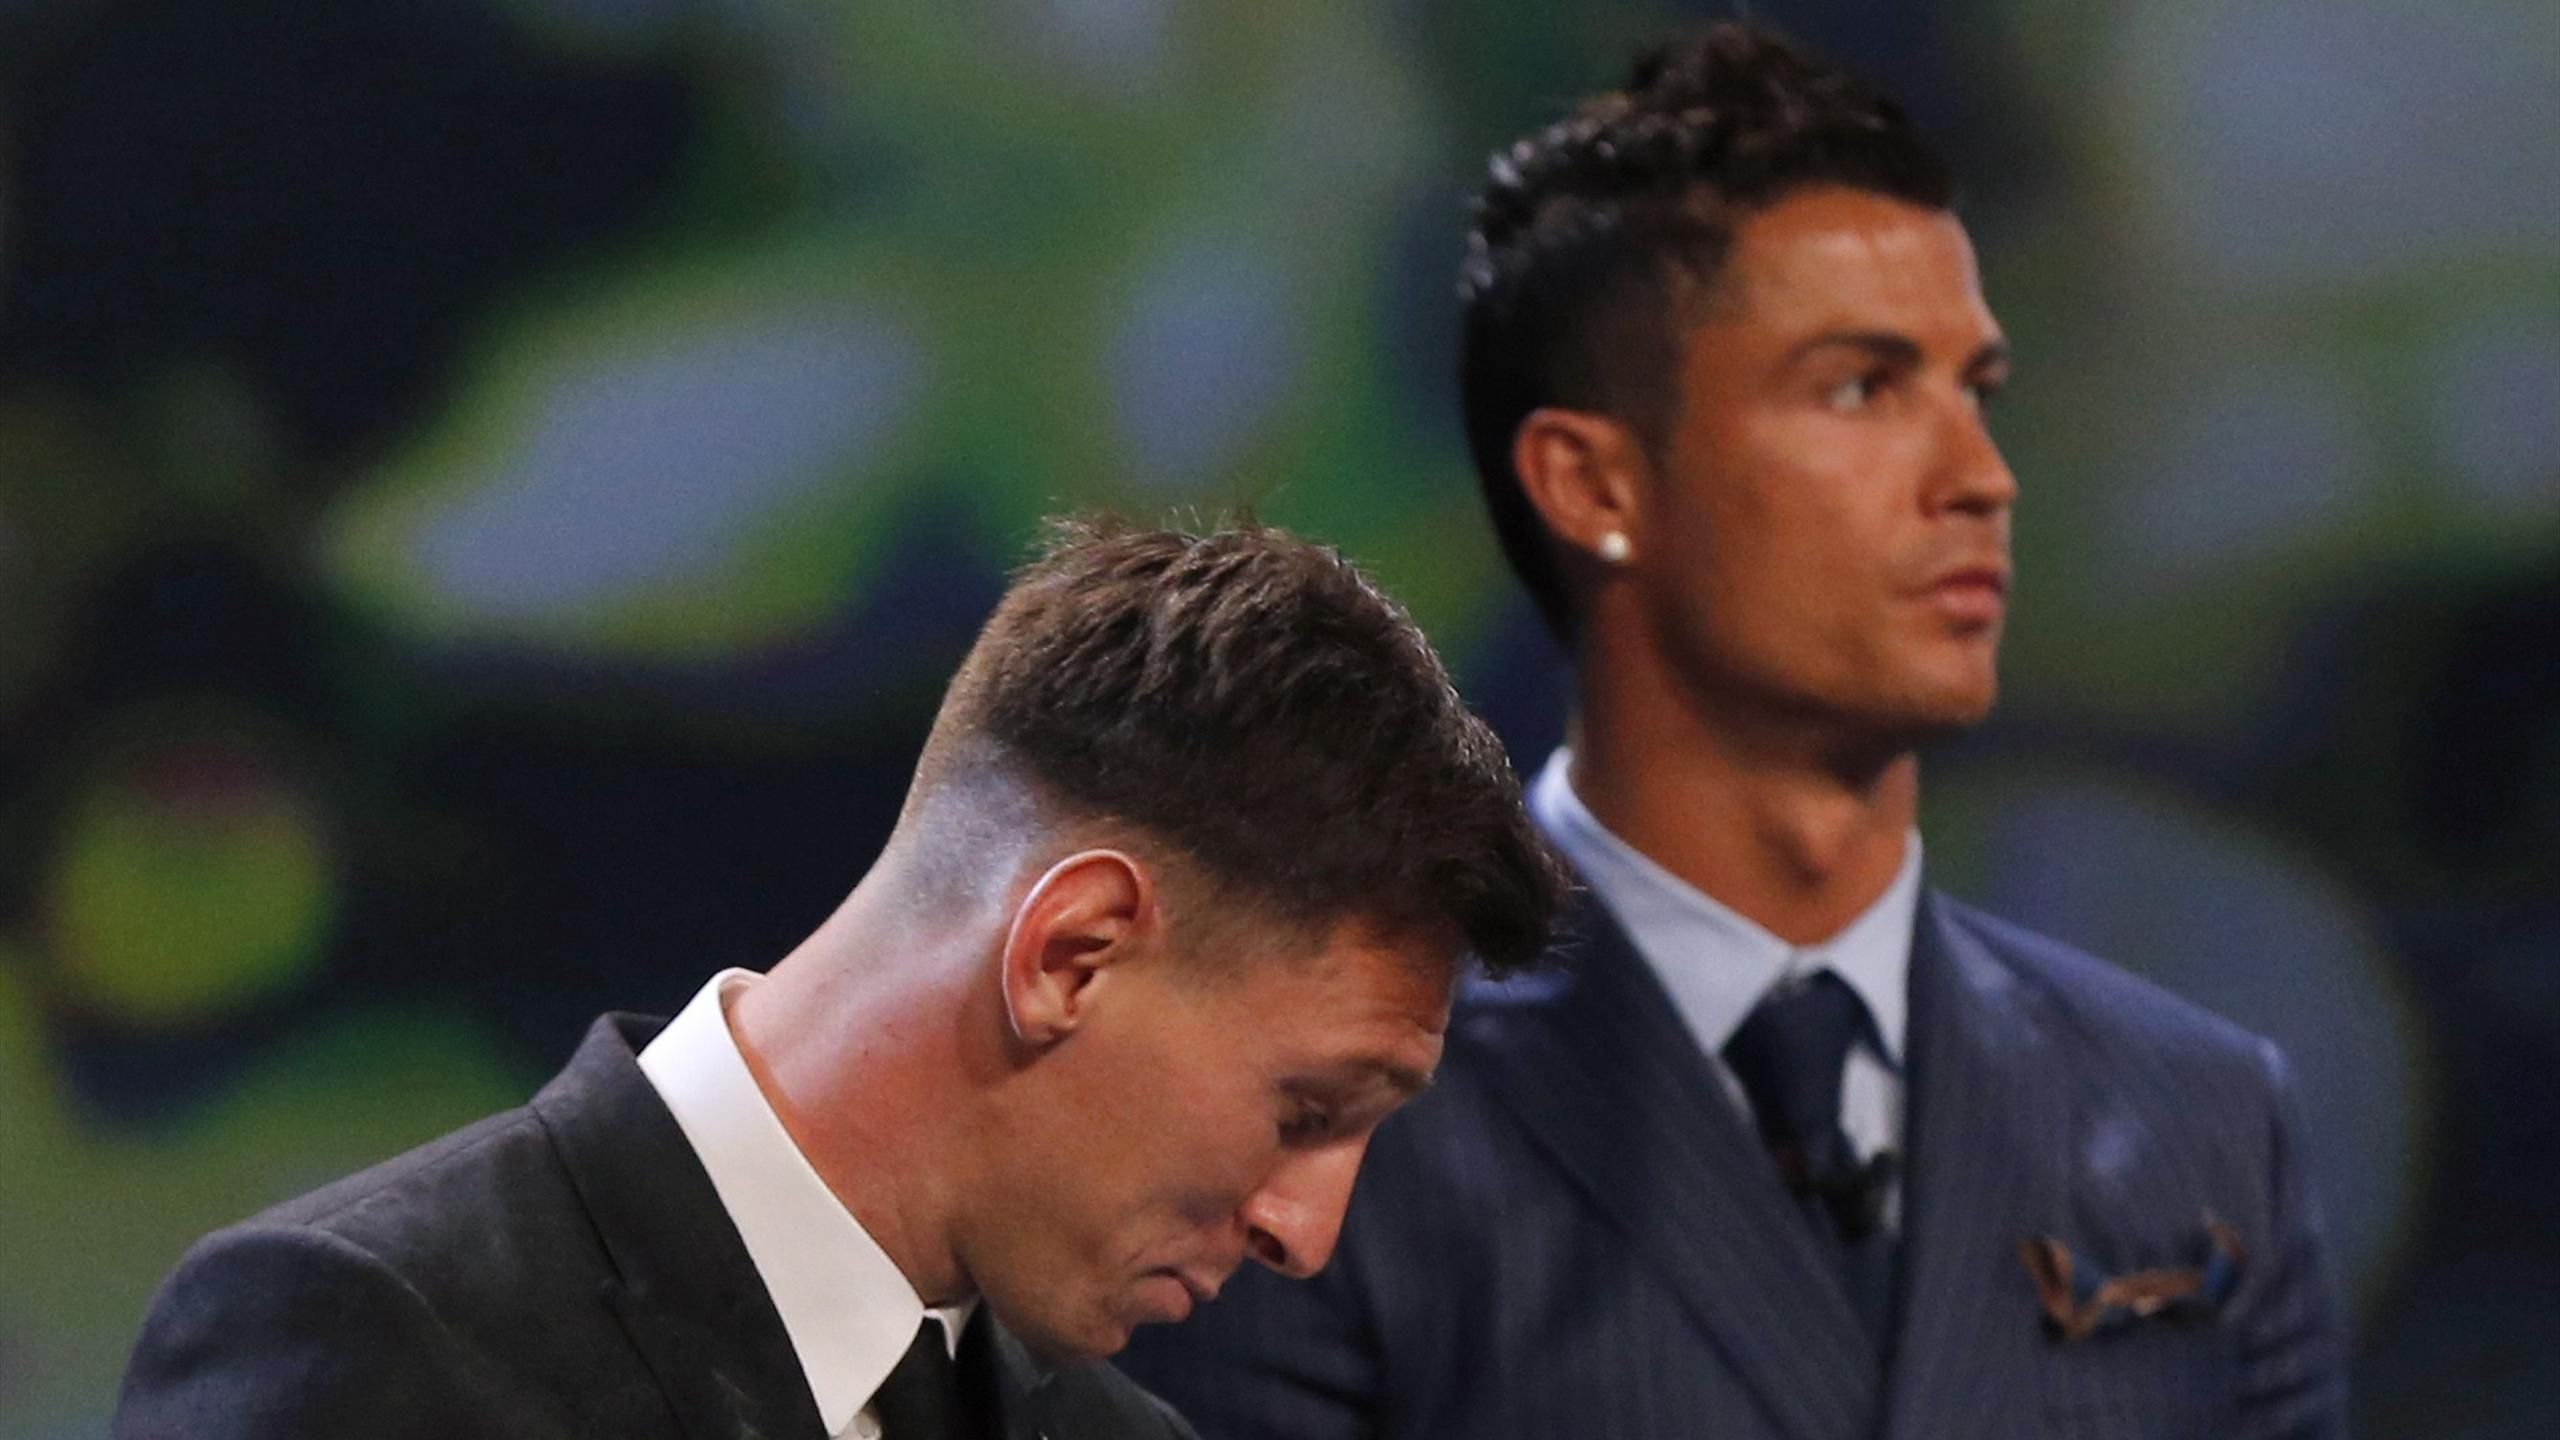 Cristiano Ronaldo's suit steals the show at UEFA Best Player in Europe award ceremony